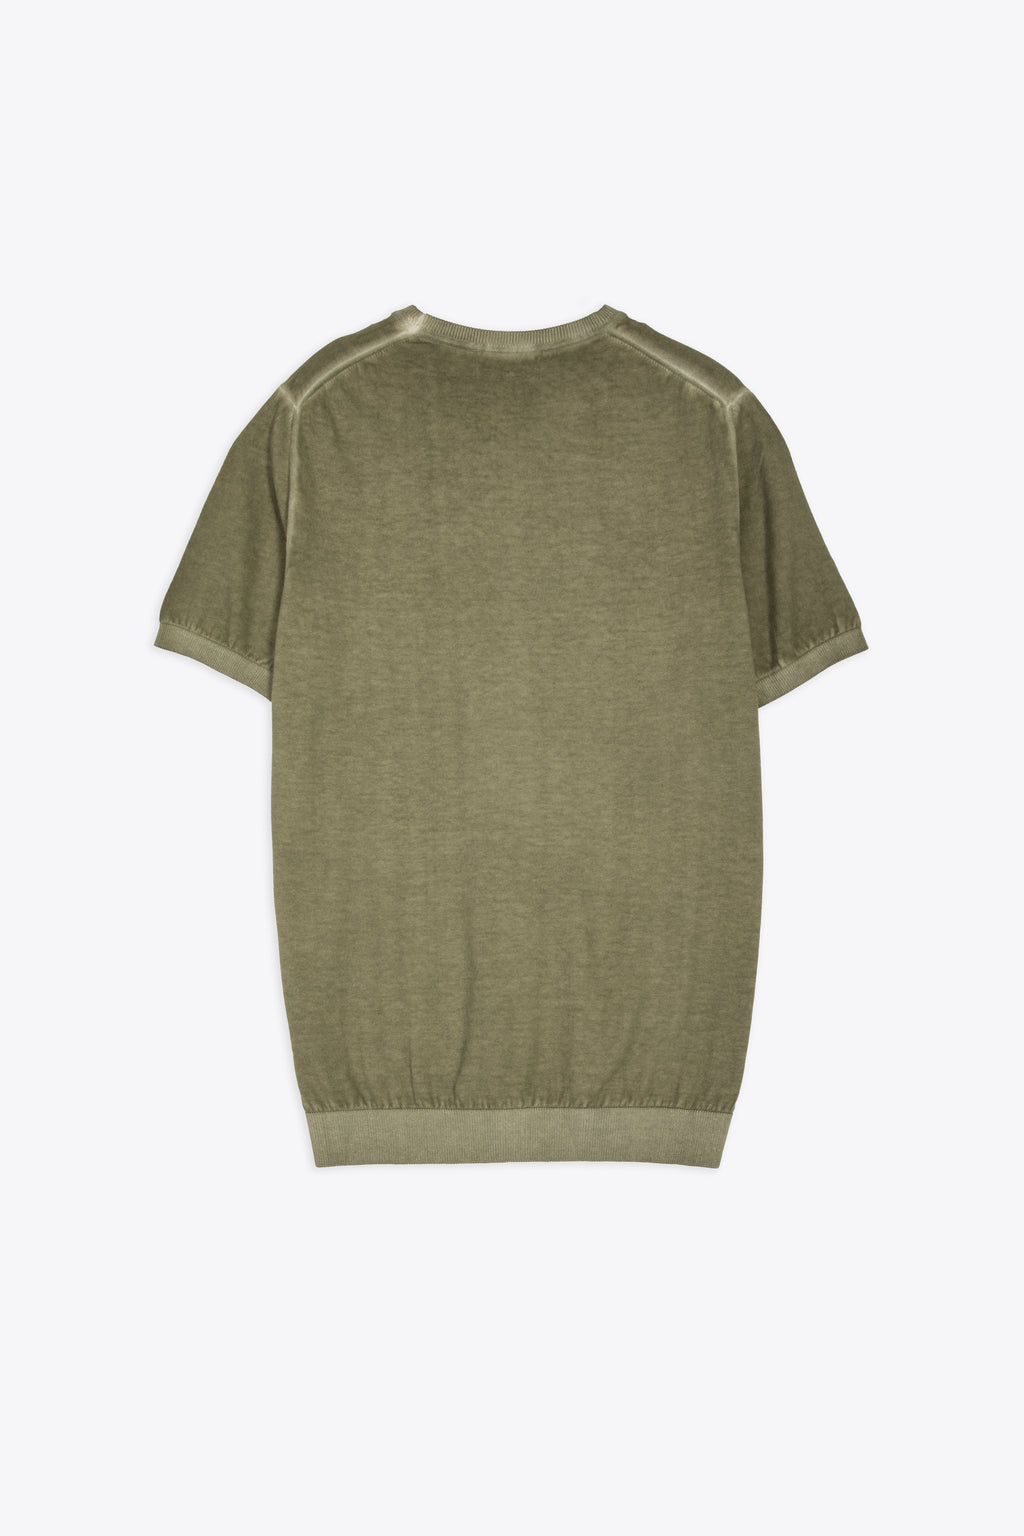 alt-image__Washed-military-green-cotton-knit-t-shirt